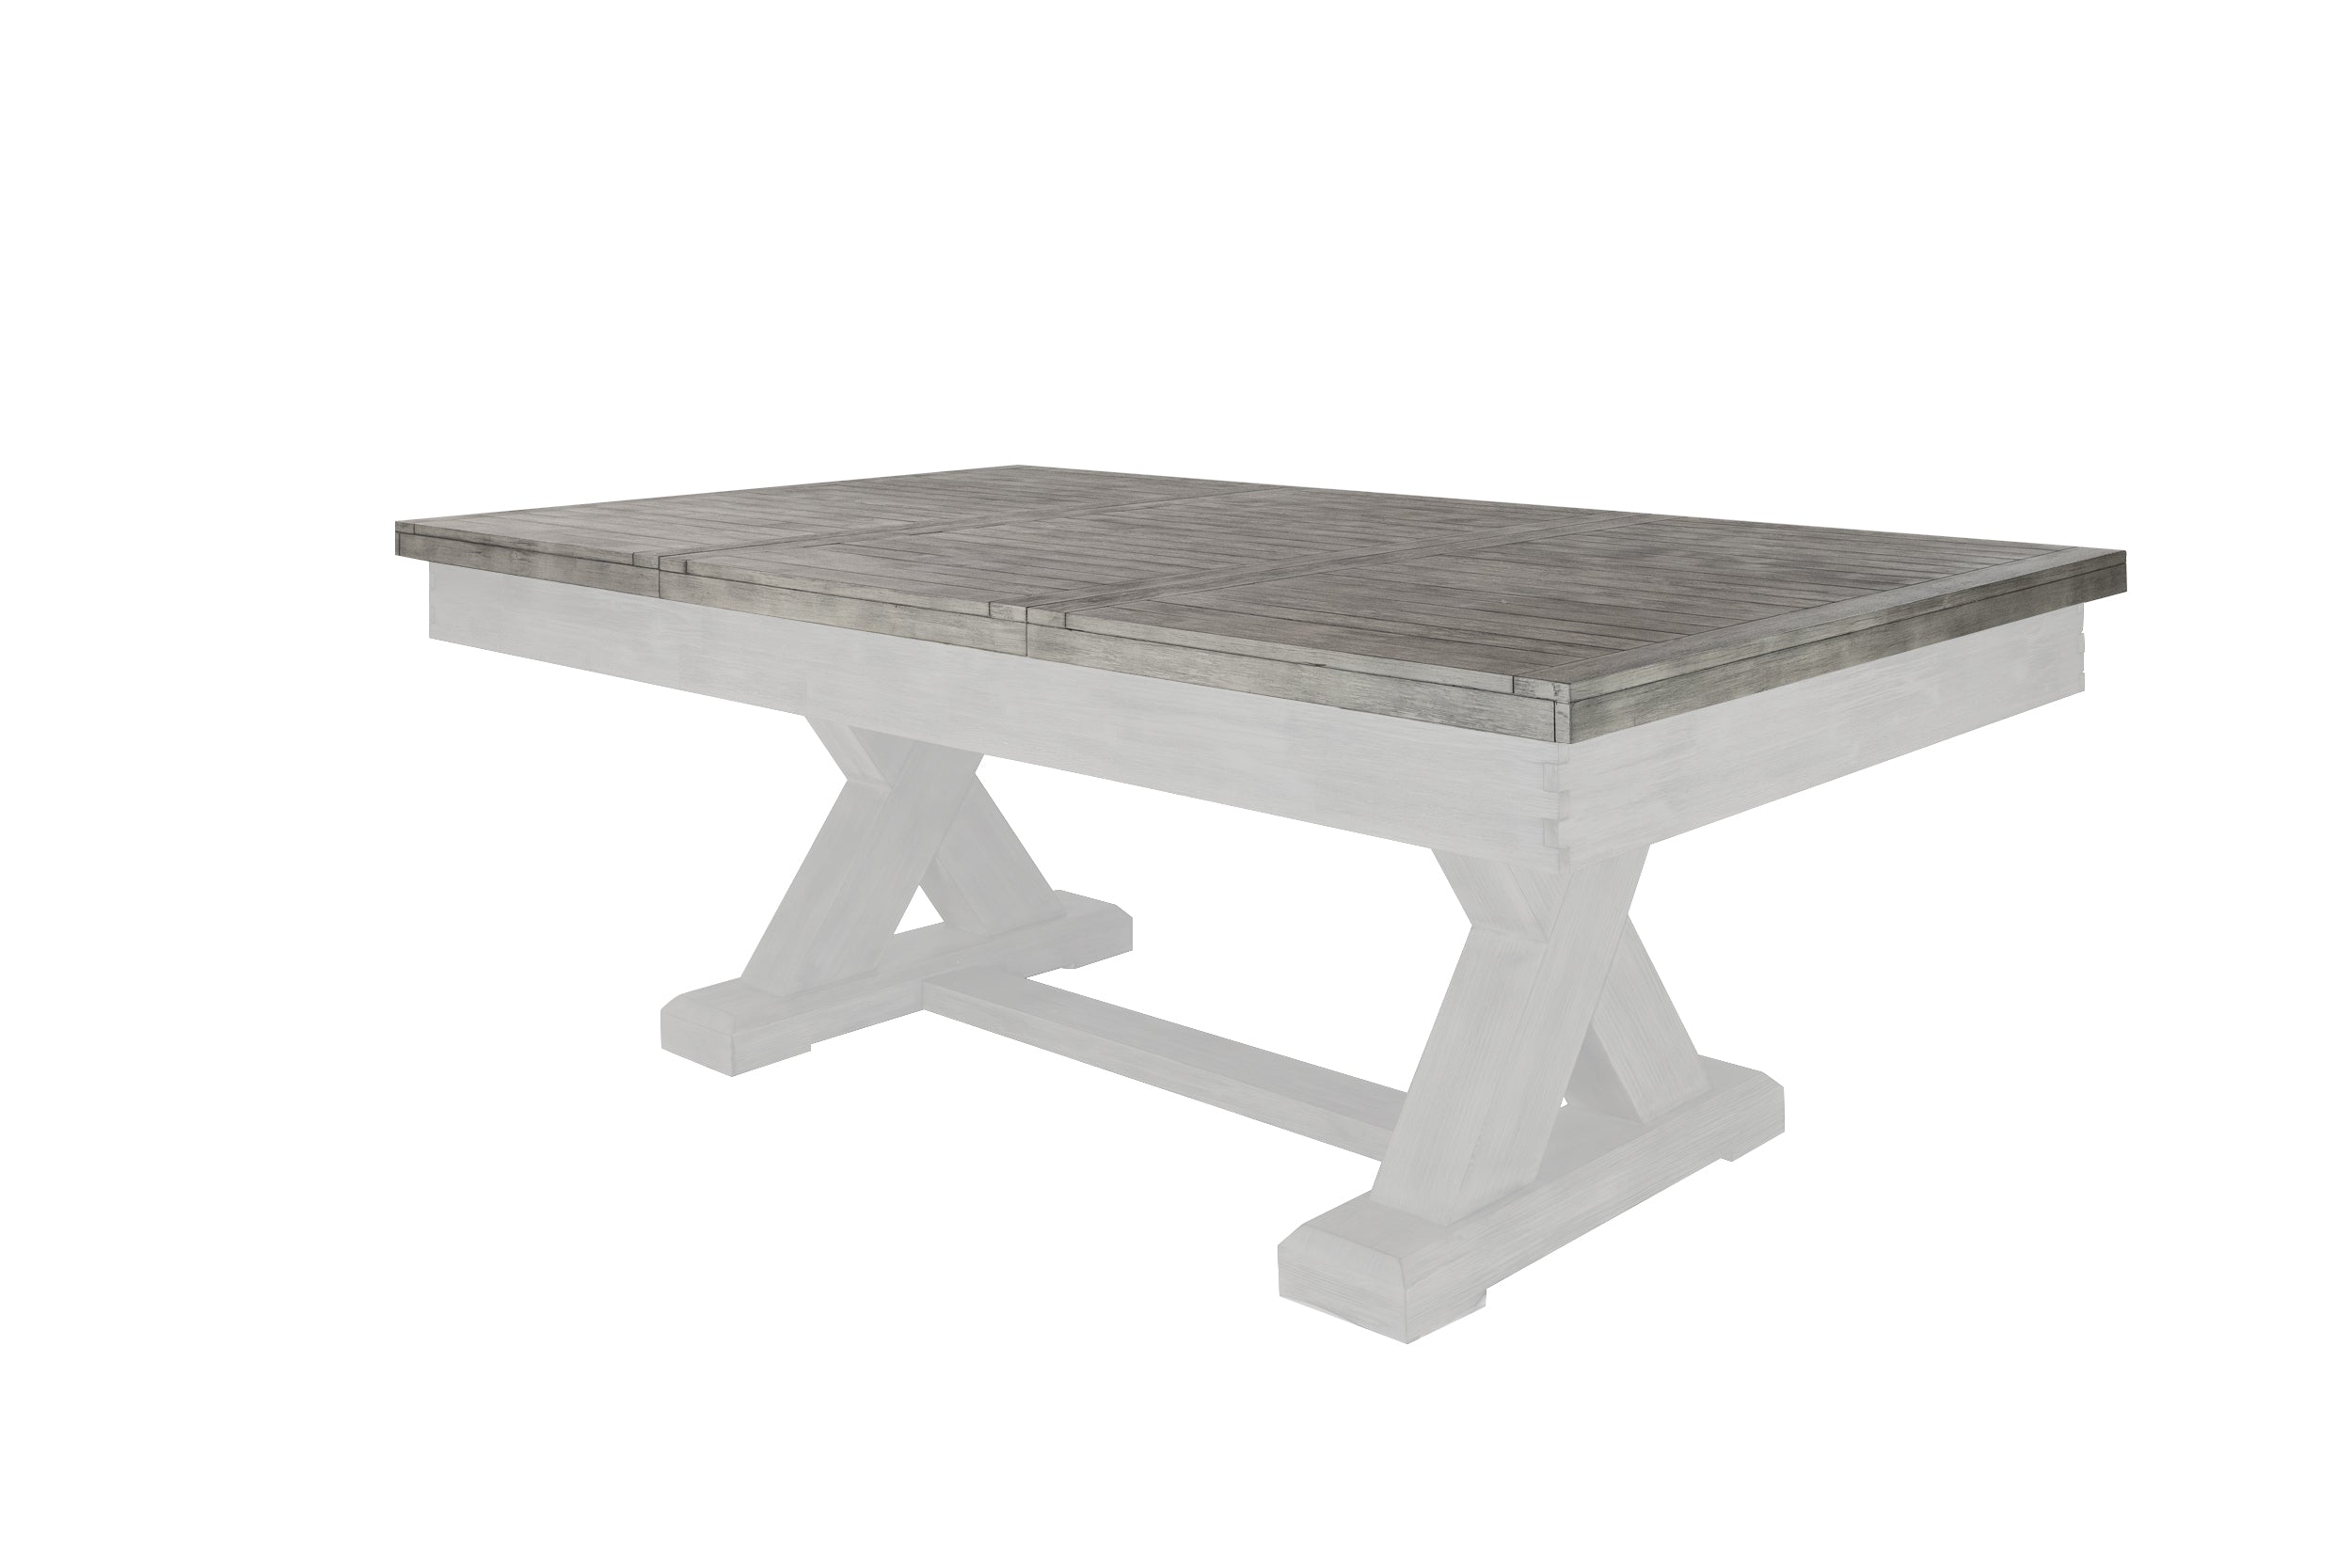 Legacy Billiards 7 Ft Outdoor Dining Top in Ash Grey Finish - Primary Image